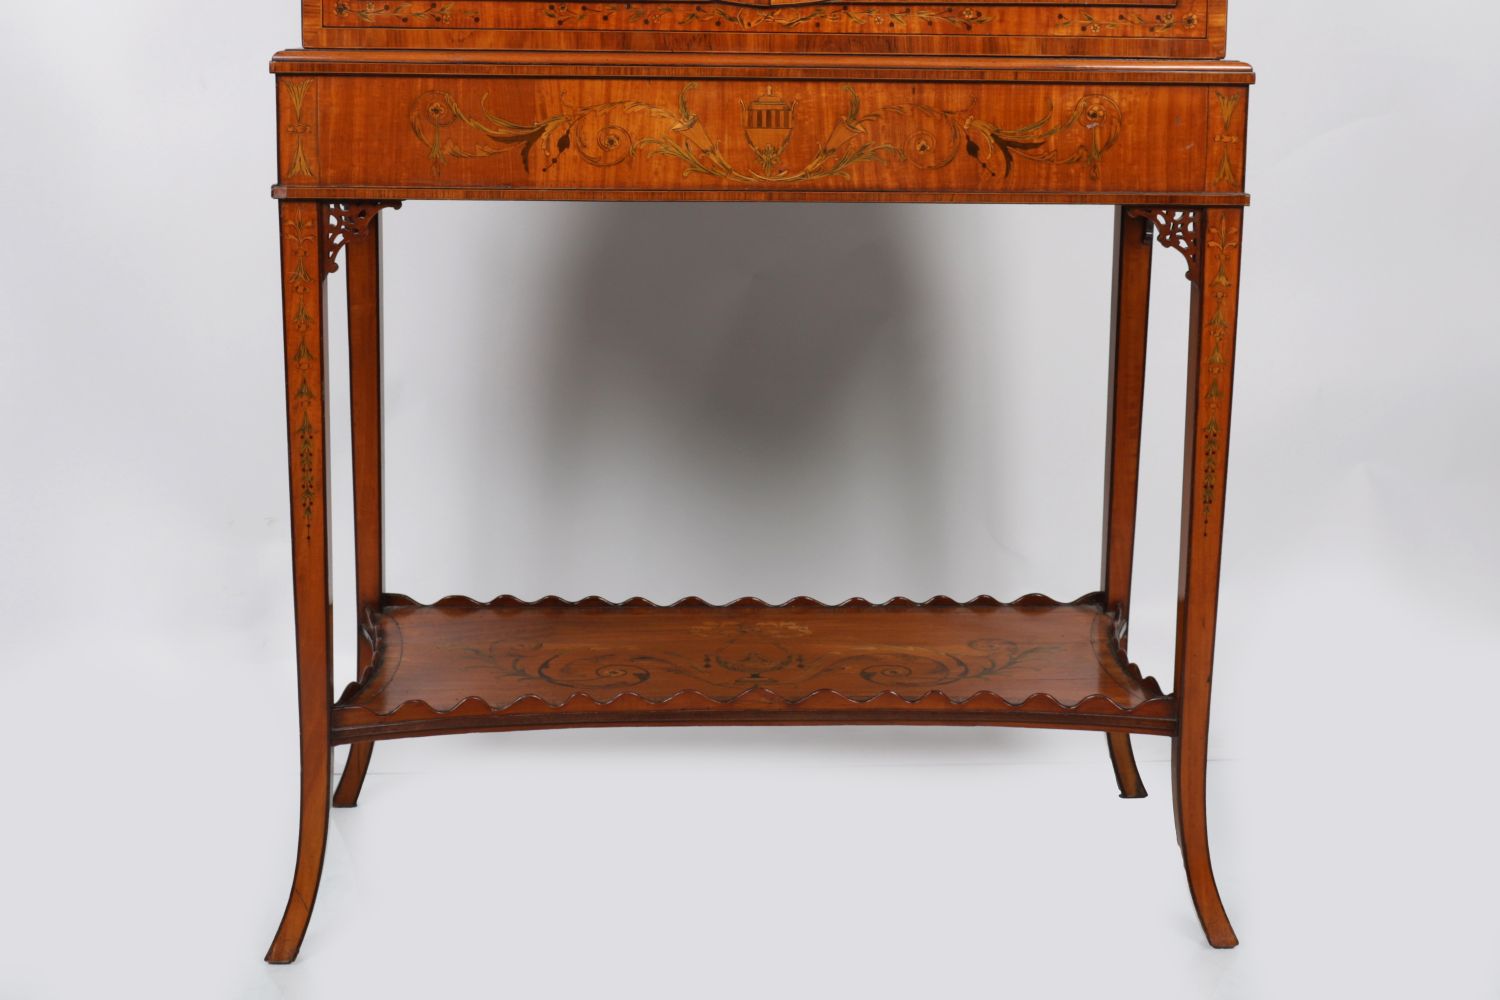 GEORGE III SATINWOOD & MARQUETRY CABINET ON STAND - Image 2 of 3